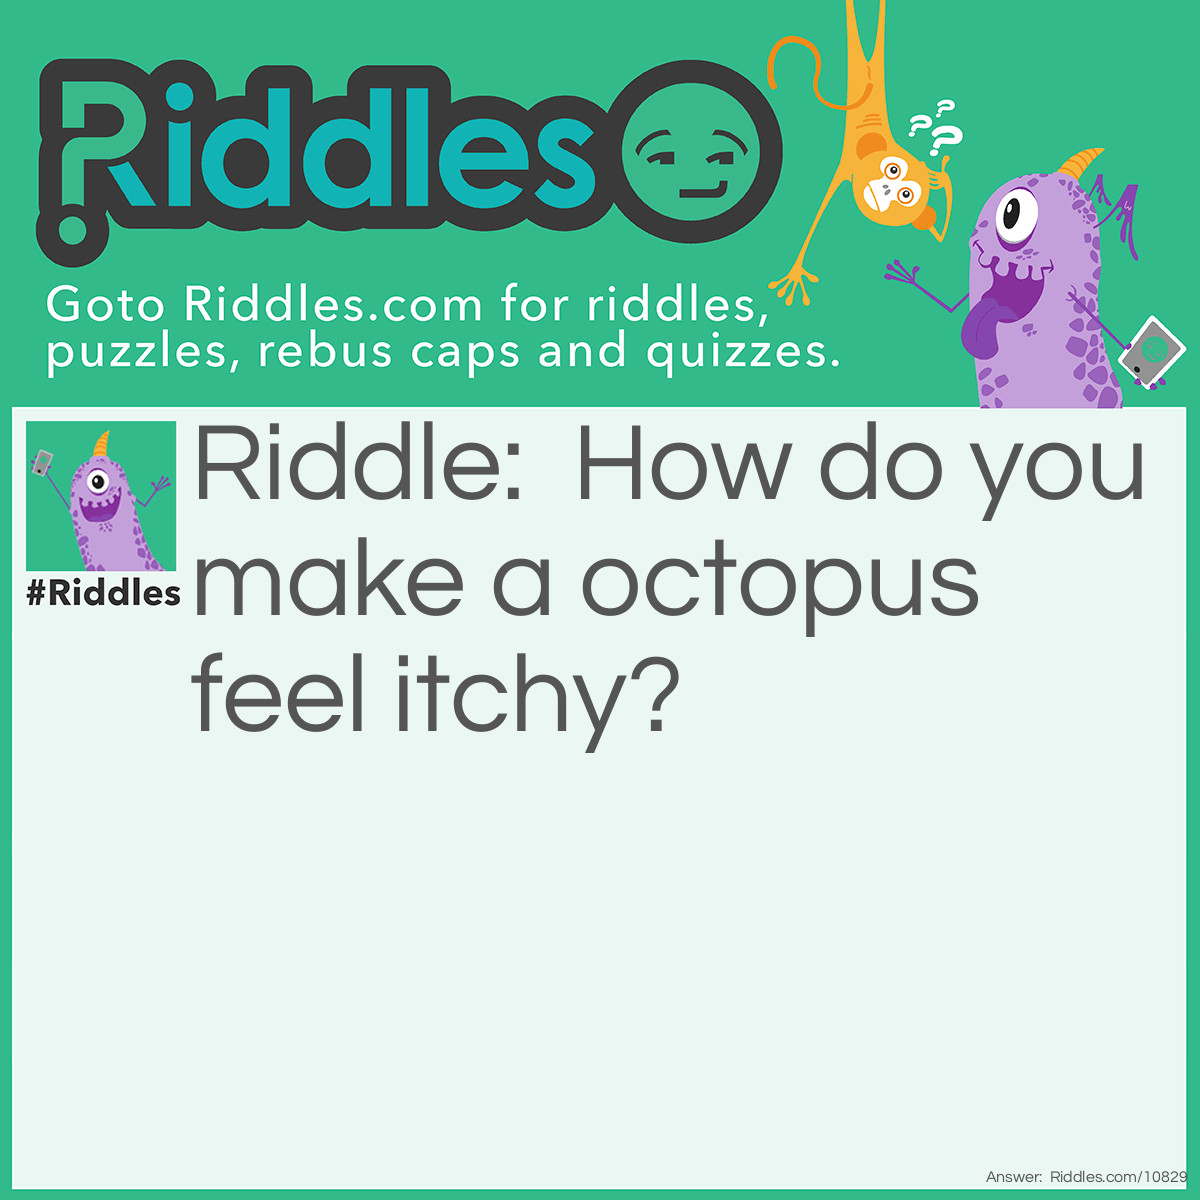 Riddle: How do you make a octopus feel itchy? Answer: Tentacles (ten tickles)